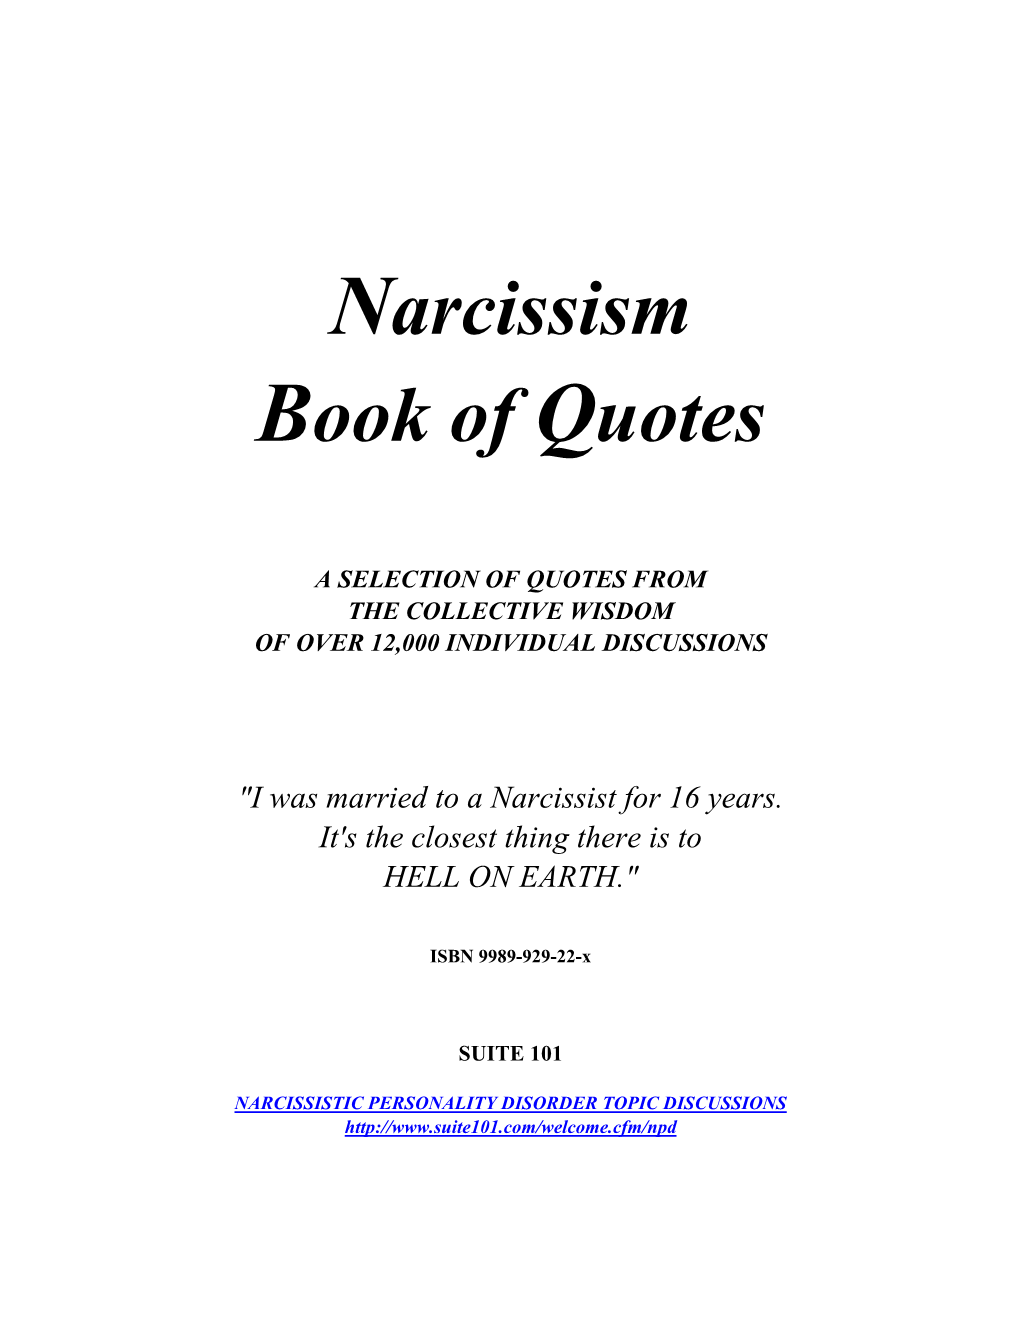 Narcissism Book of Quotes